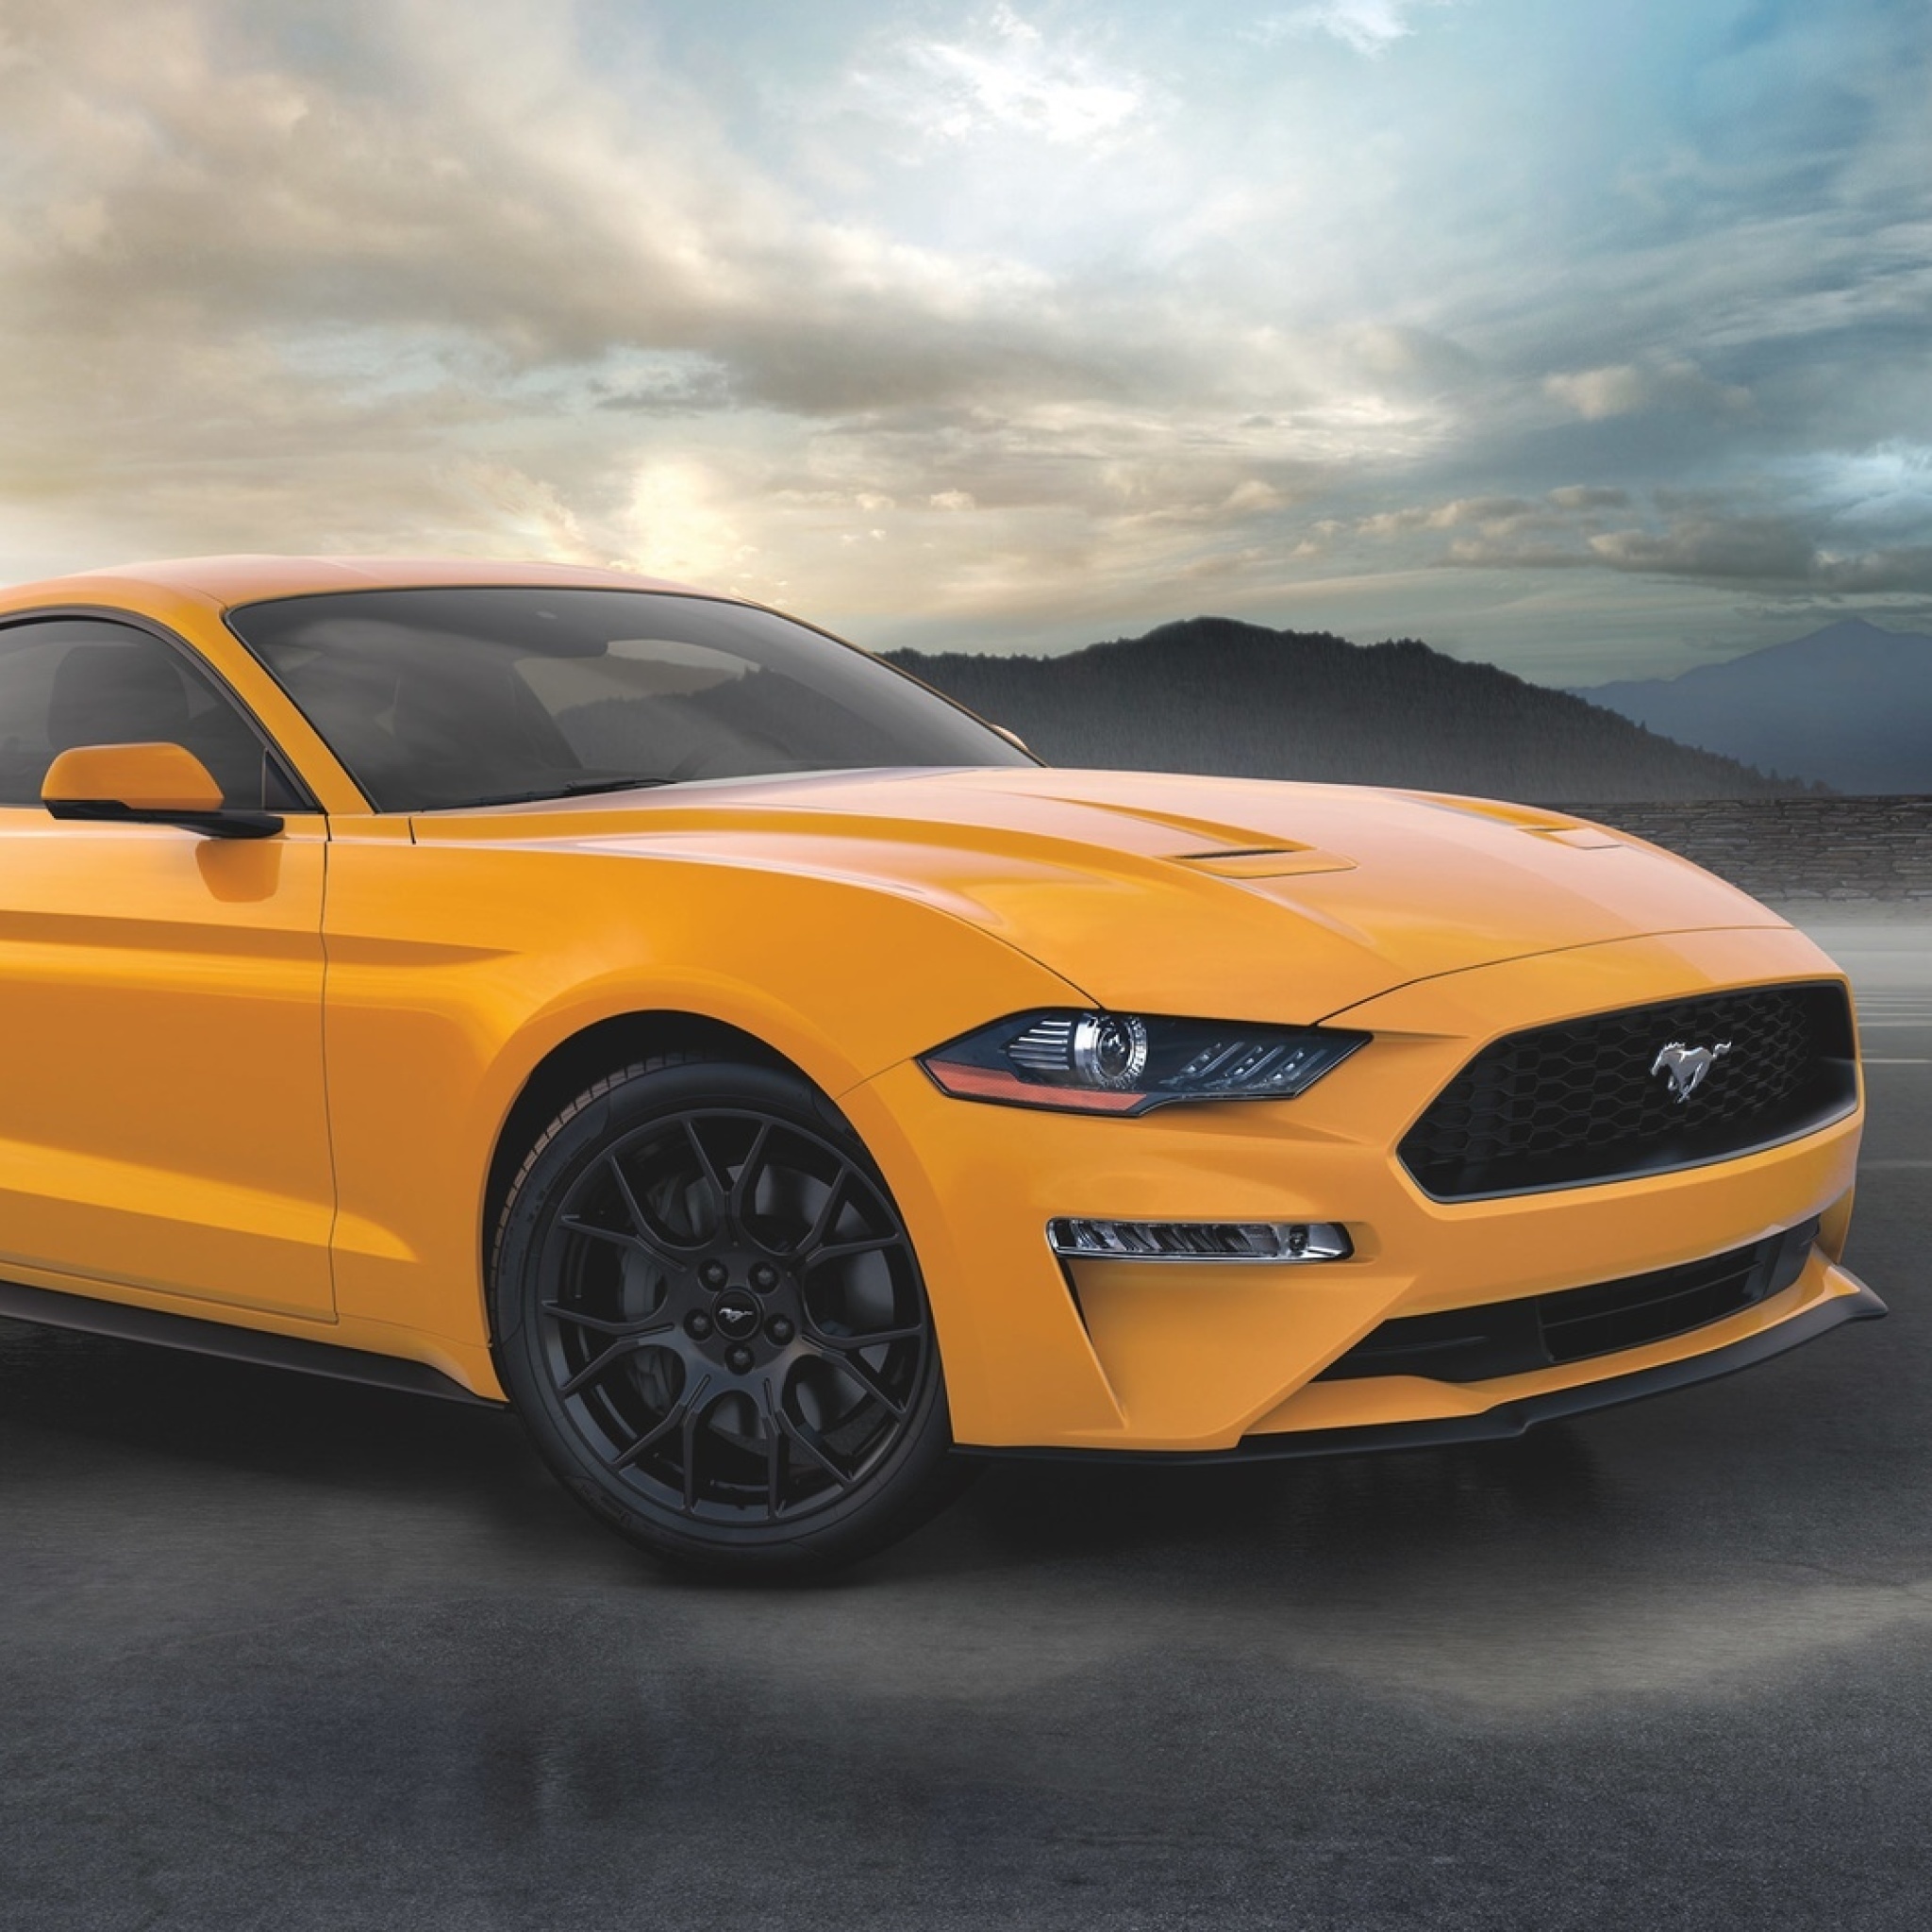 Das Ford Mustang Coupe Wallpaper 2048x2048